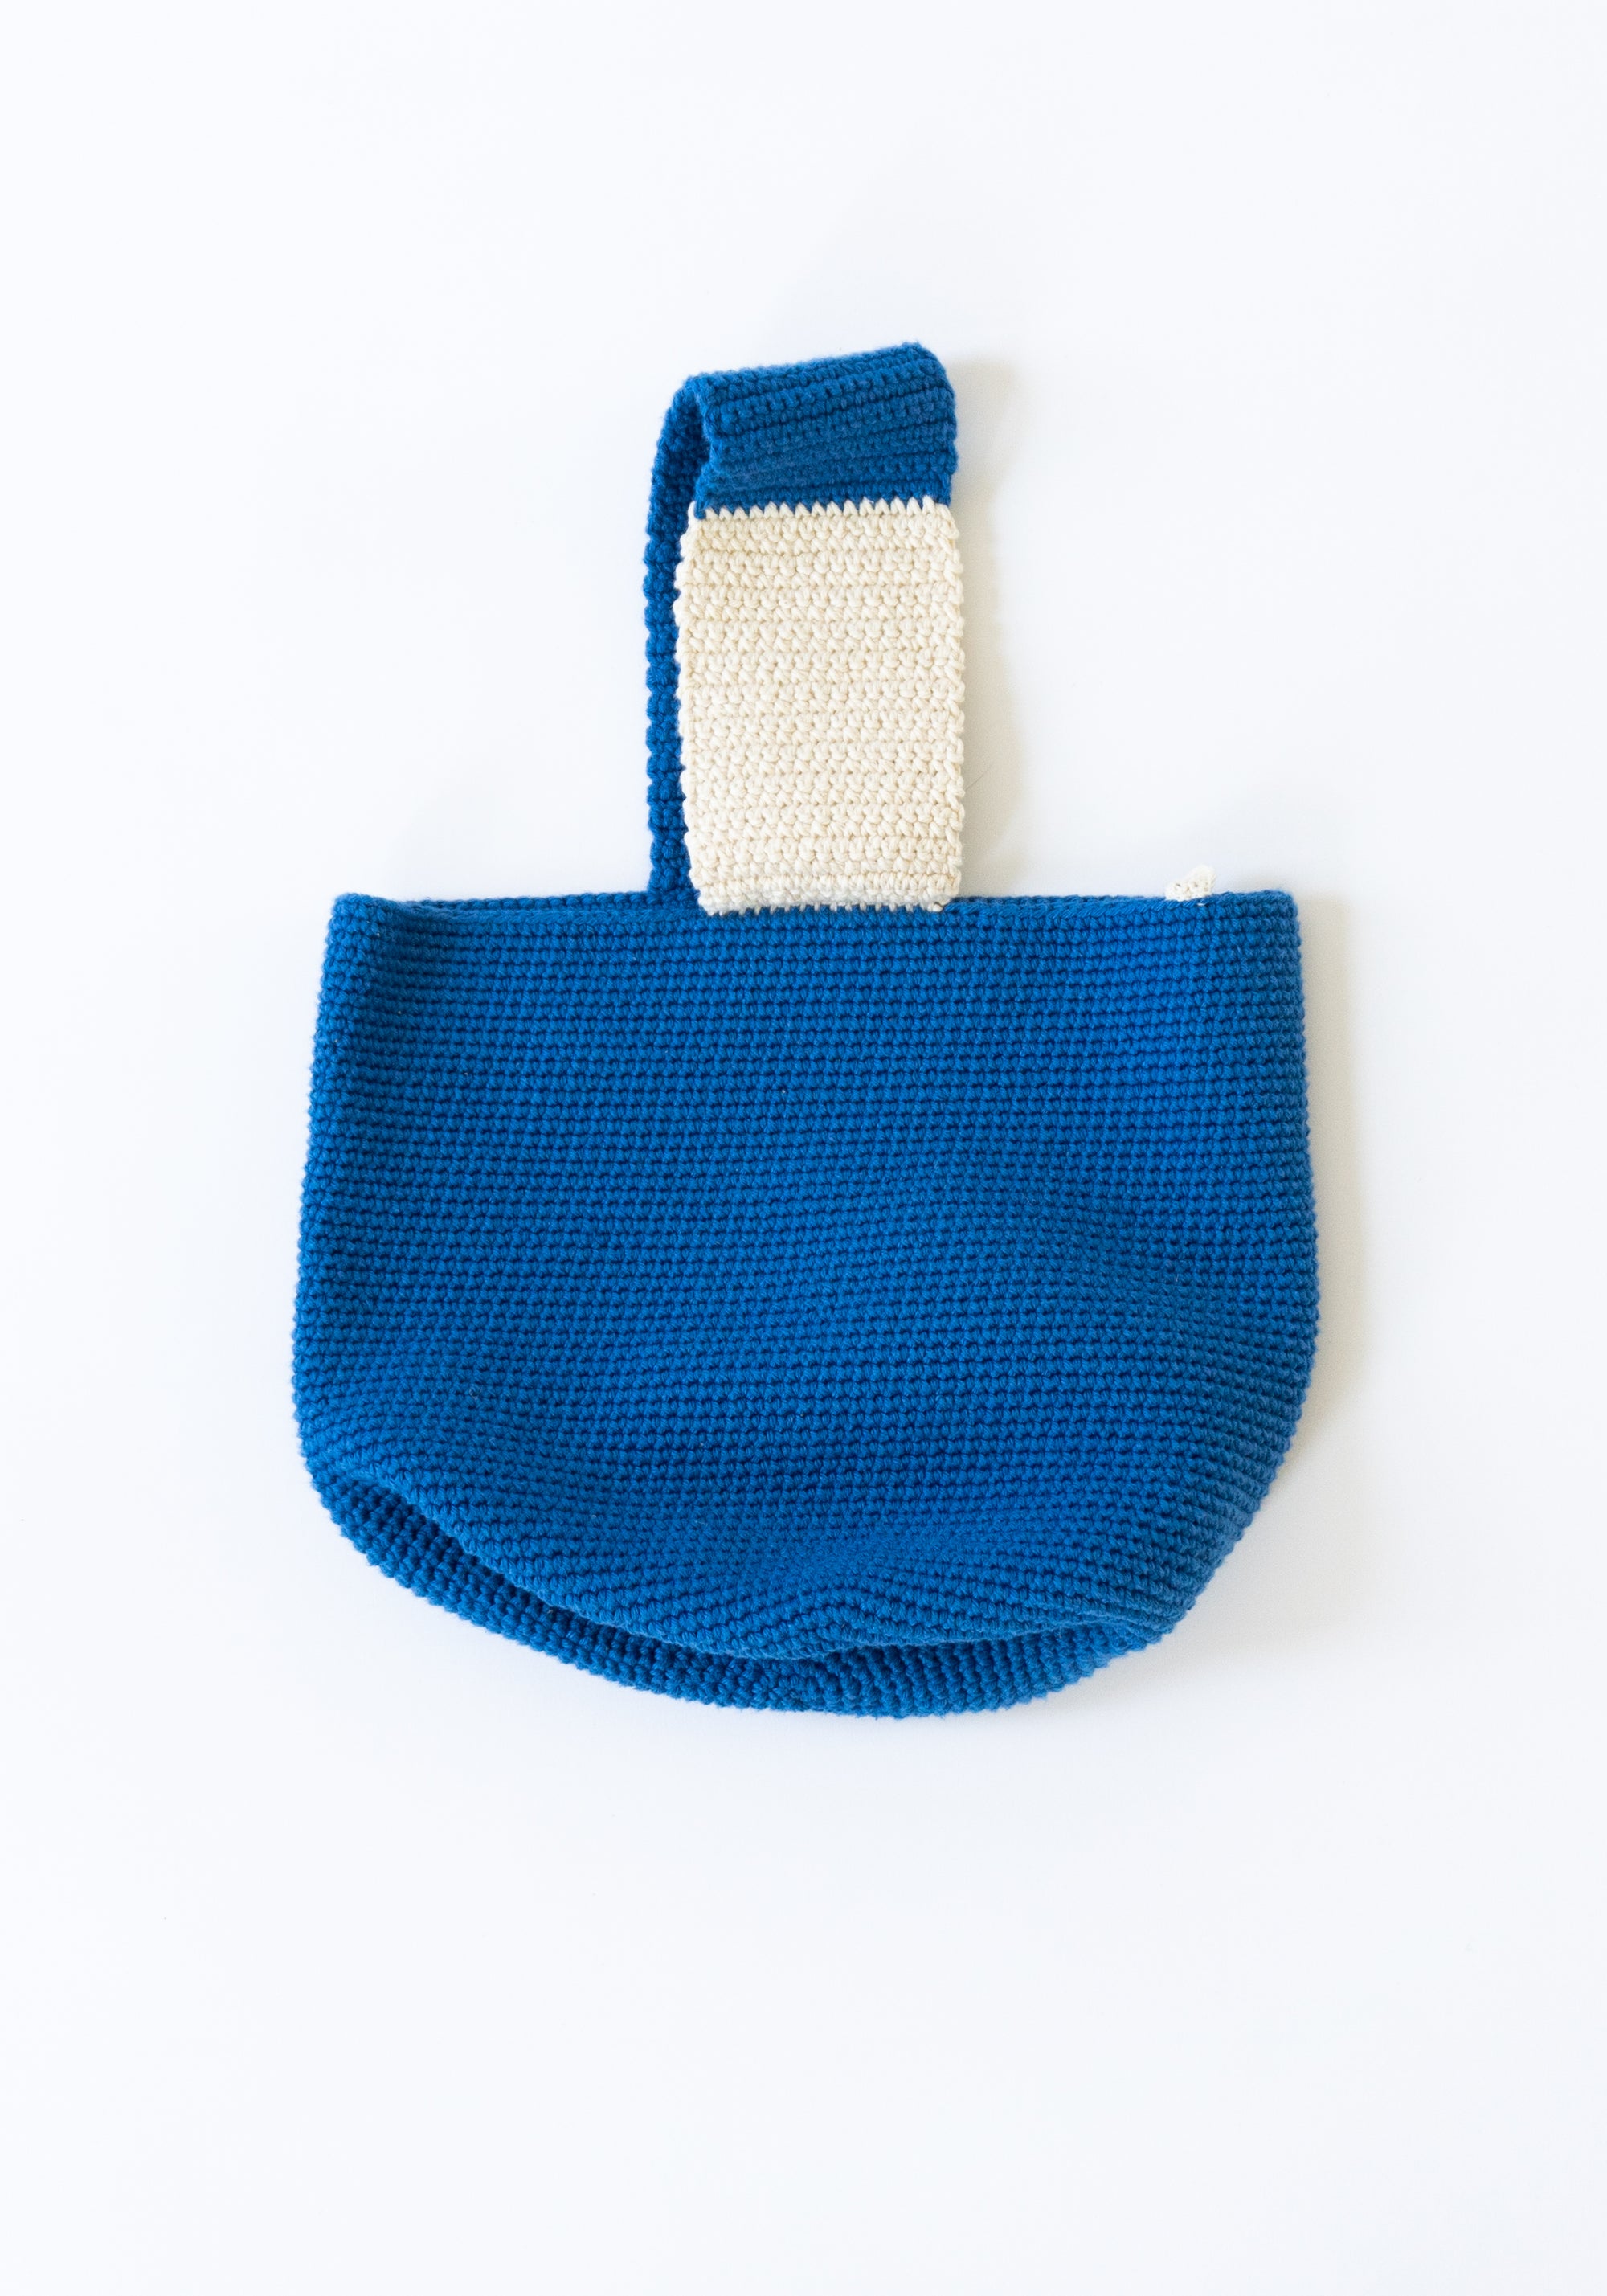 Nitto Caixa Bag in Blue Cobalt and Off White